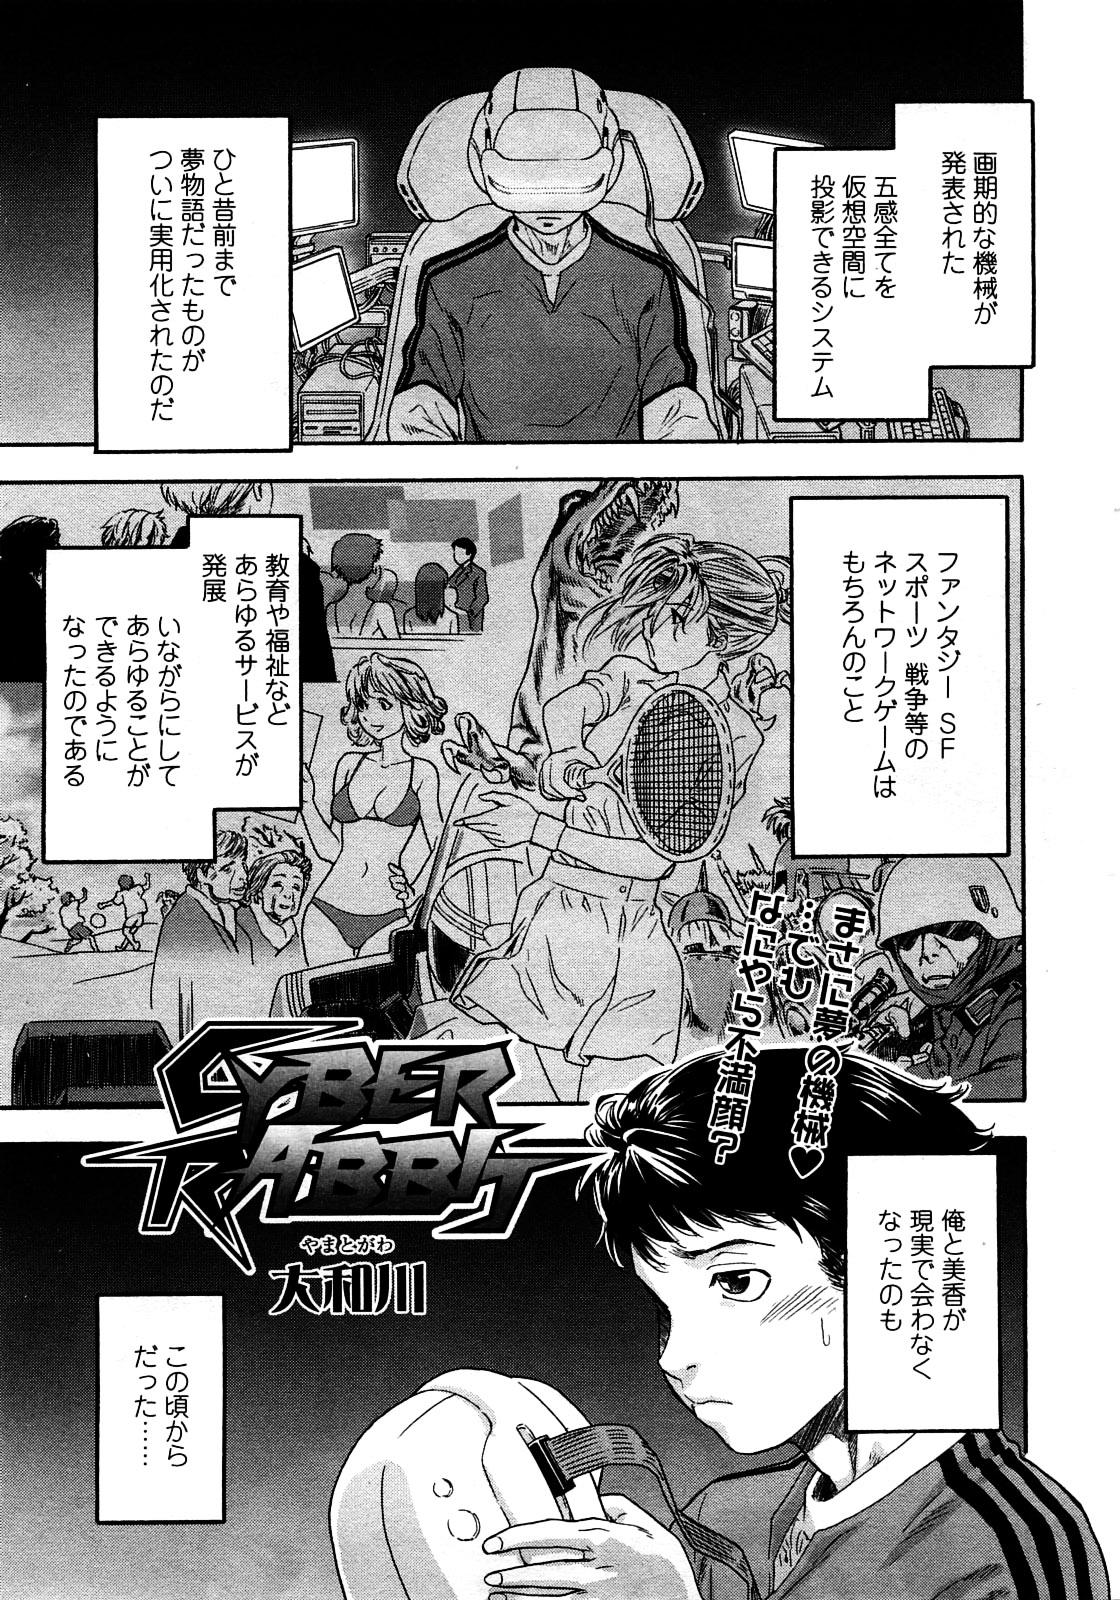 Bound COMIC TENMA 2008-03 Leaked - Page 8